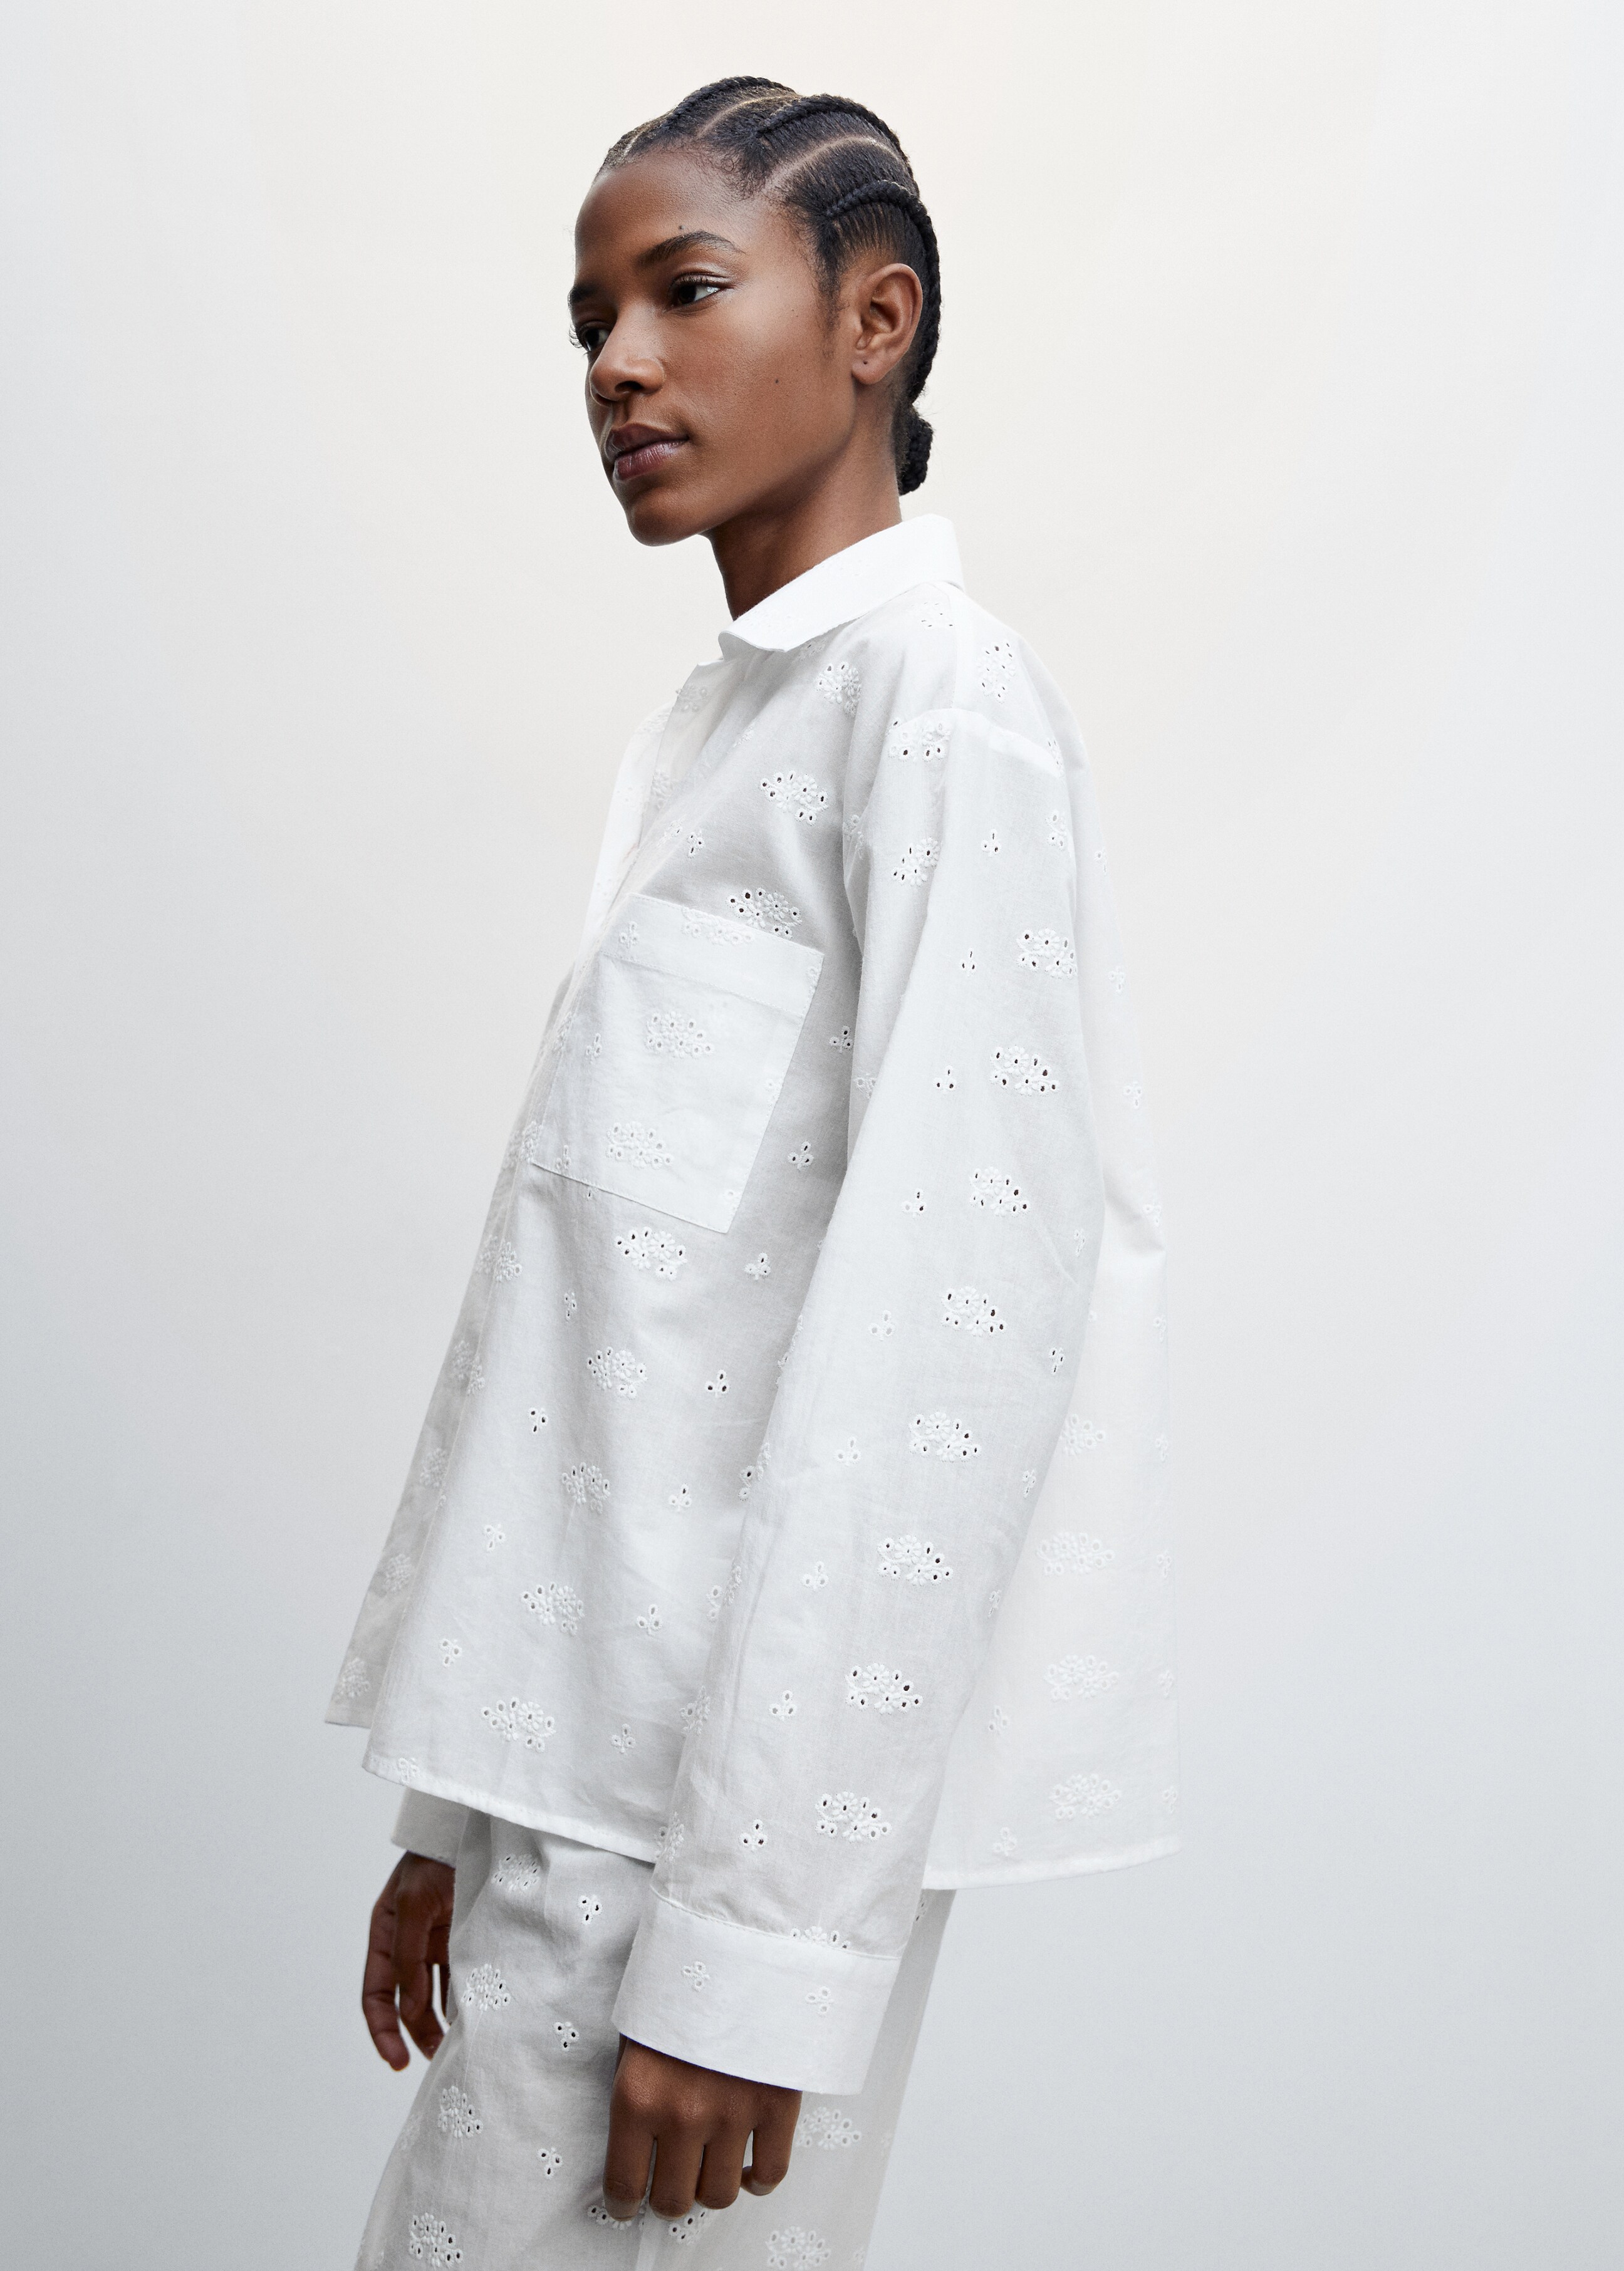 Pyjama shirt with openwork details - Details of the article 2